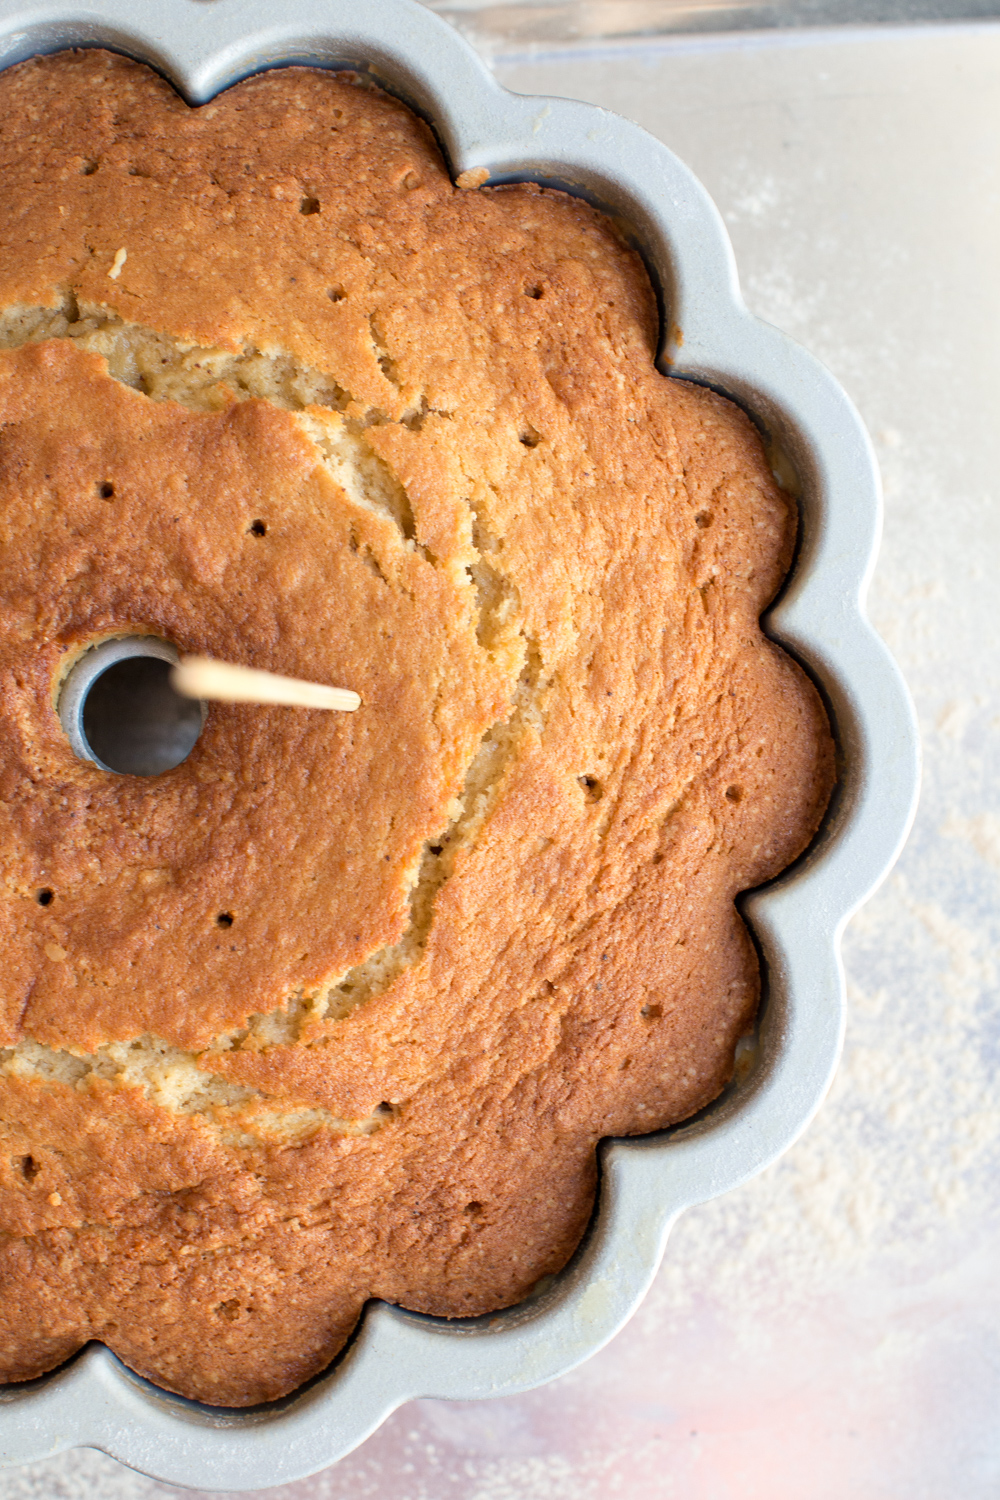 poking holes in a brown butter bourbon bundt cake baked fresh from the oven